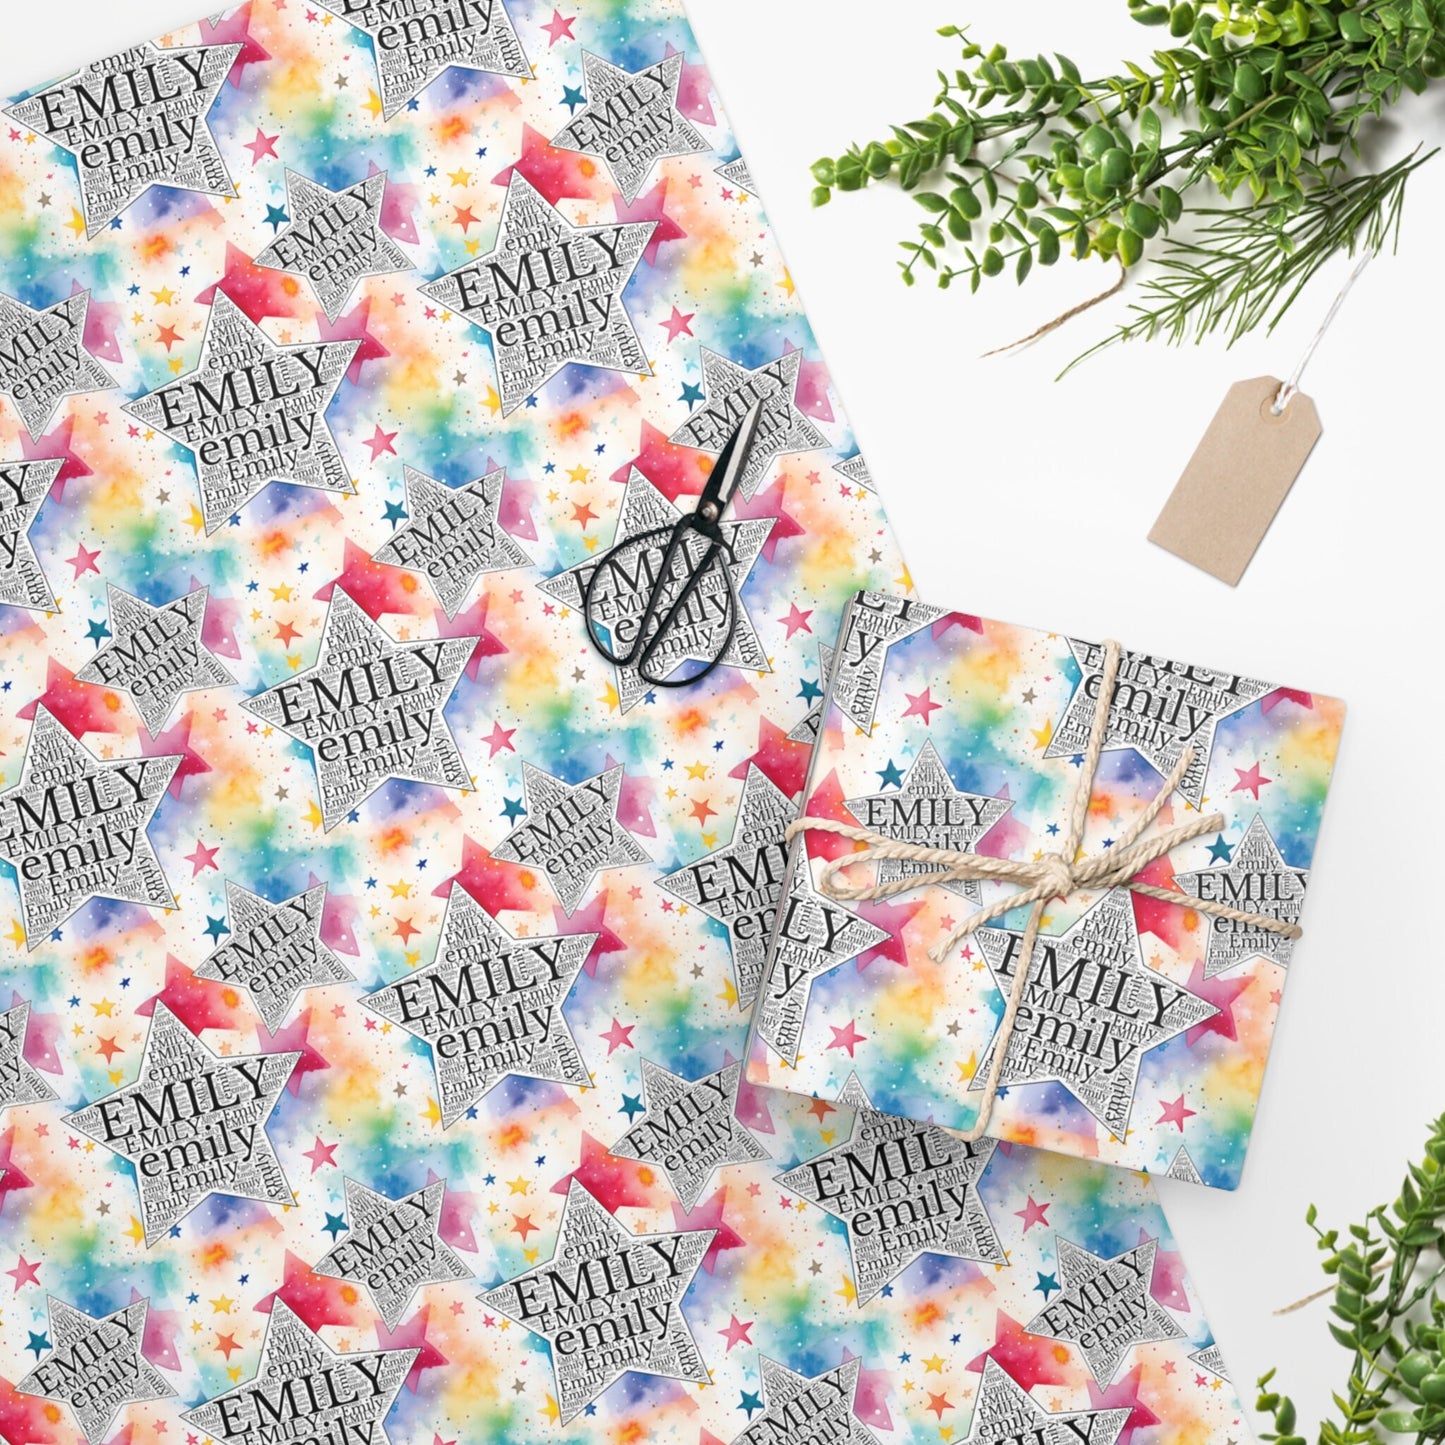 Personalized Dreamy Watercolor Stars Gift Wrapping Paper Roll, Birthday Gift Wrap Paper, Christmas Wrapping, Baby Shower Name Wrapping Paper